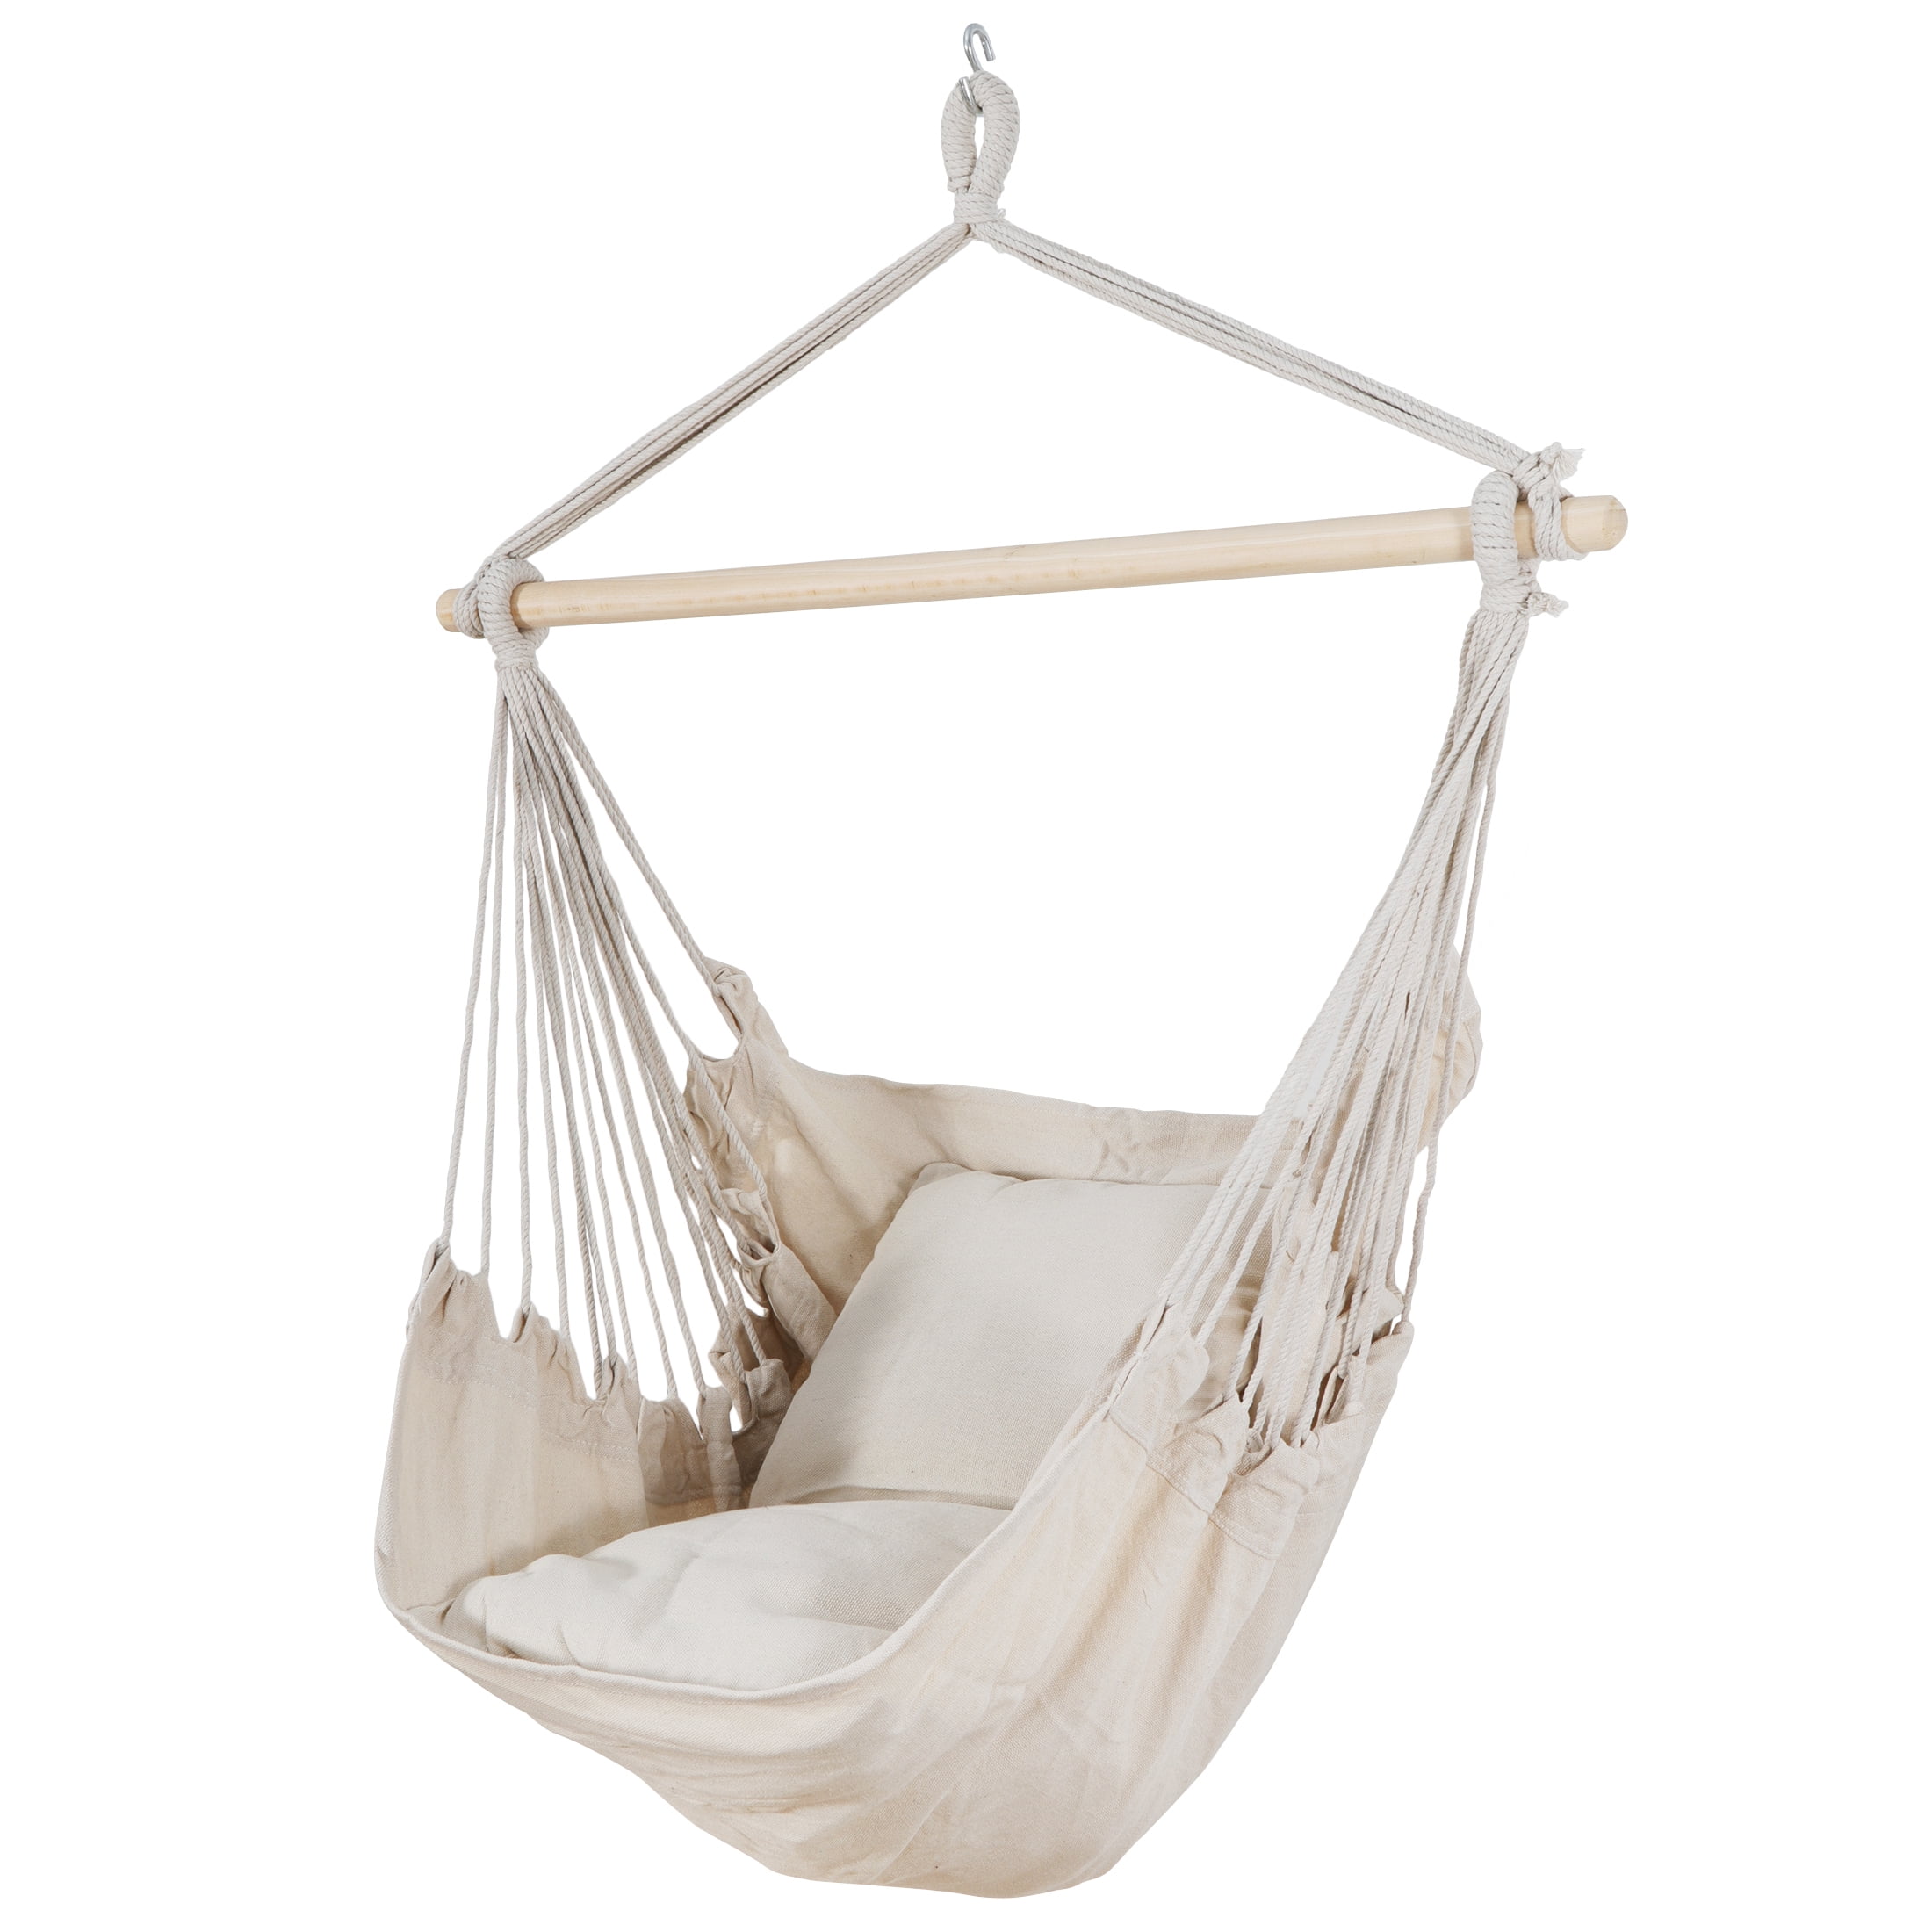 Details about   Hanging Rope Chair Hammock with Pillows Cotton Canvas Water Resistant Blue New 